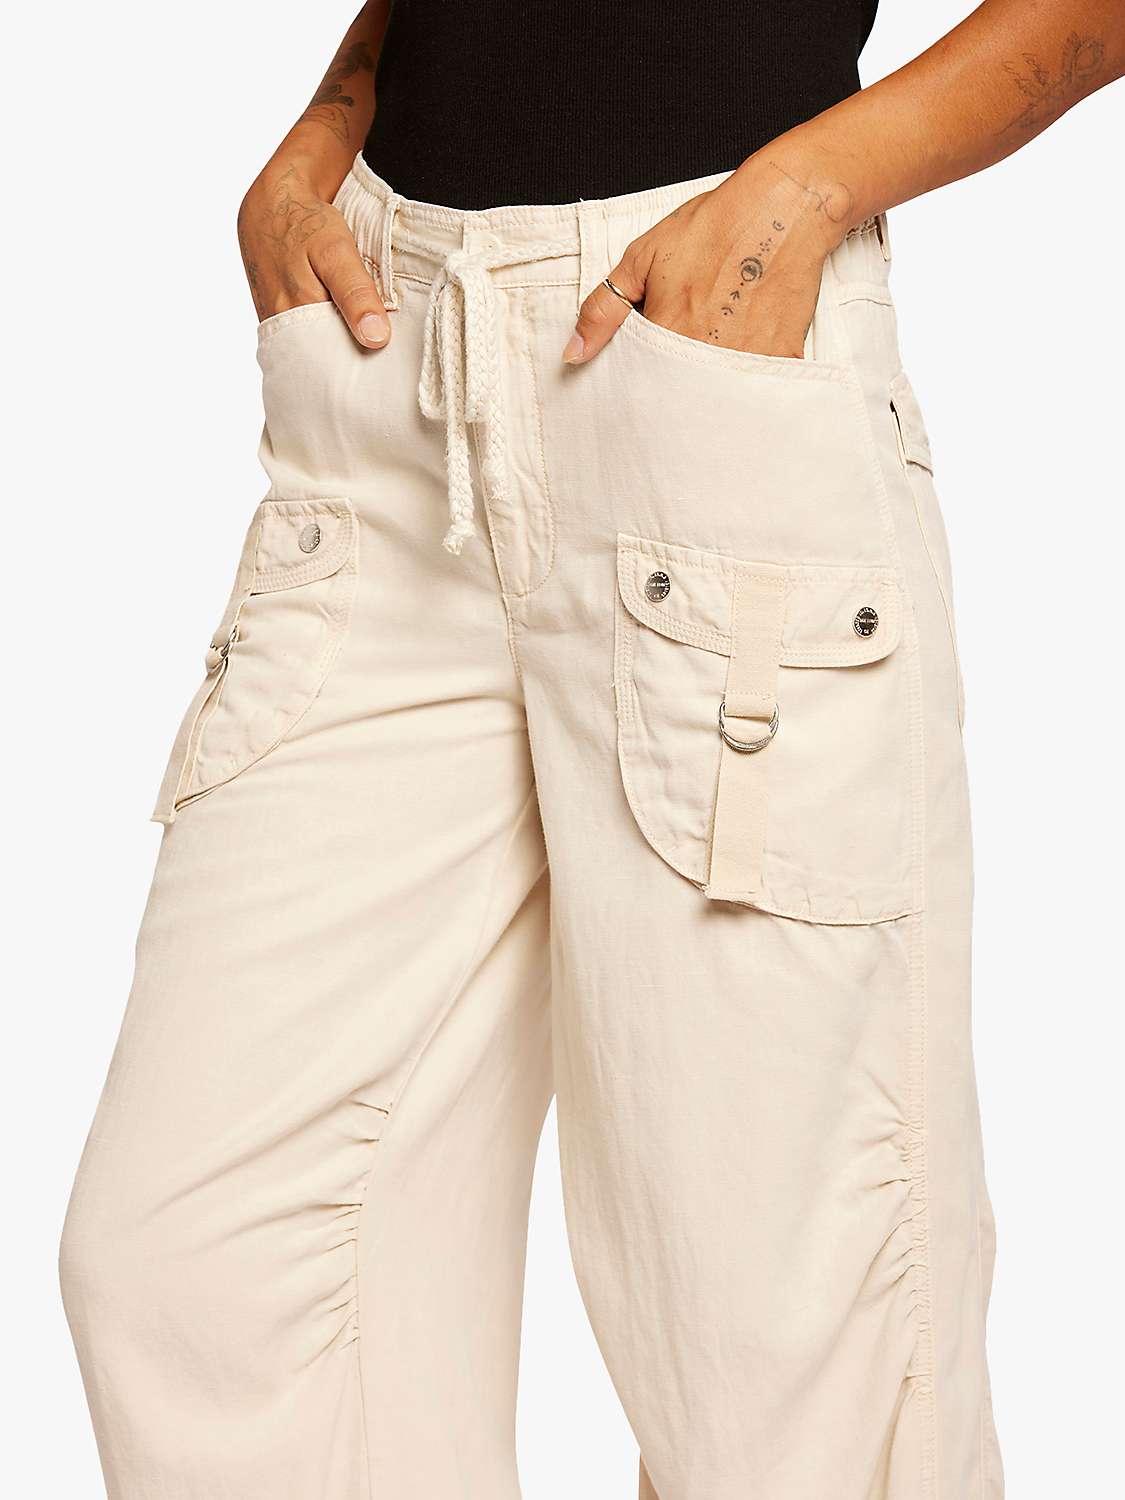 Buy Current/Elliott The Upright Loose Cargo Trousers, Biscuit Online at johnlewis.com